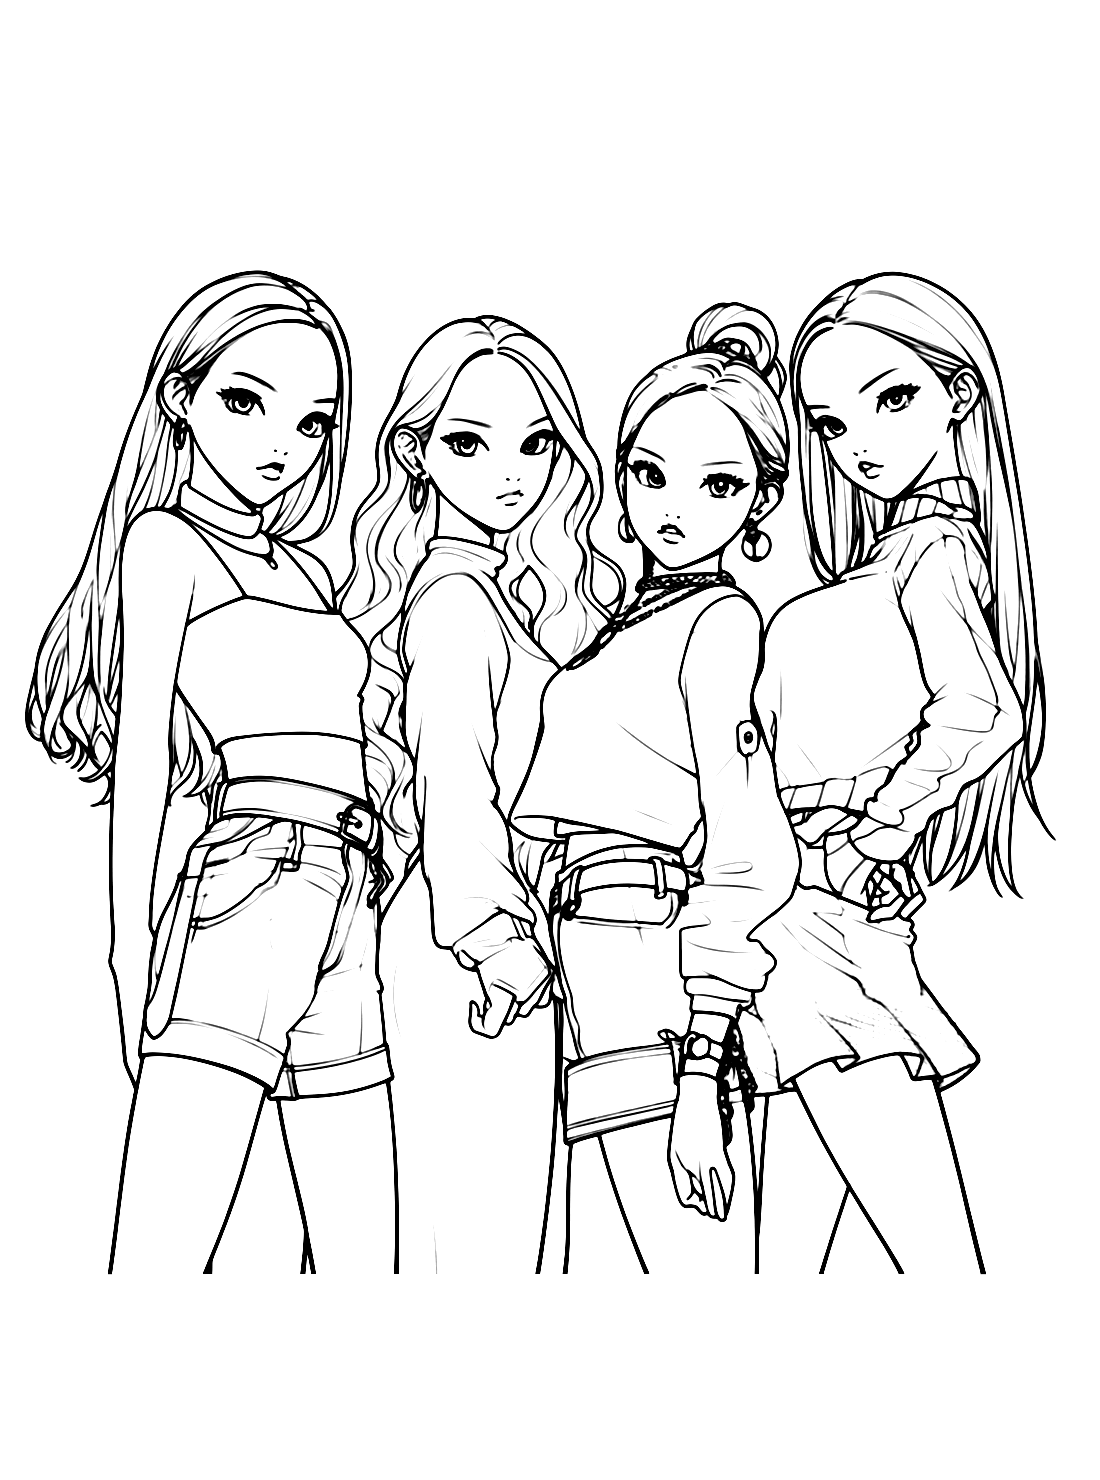 Blackpink drawing coloring pages